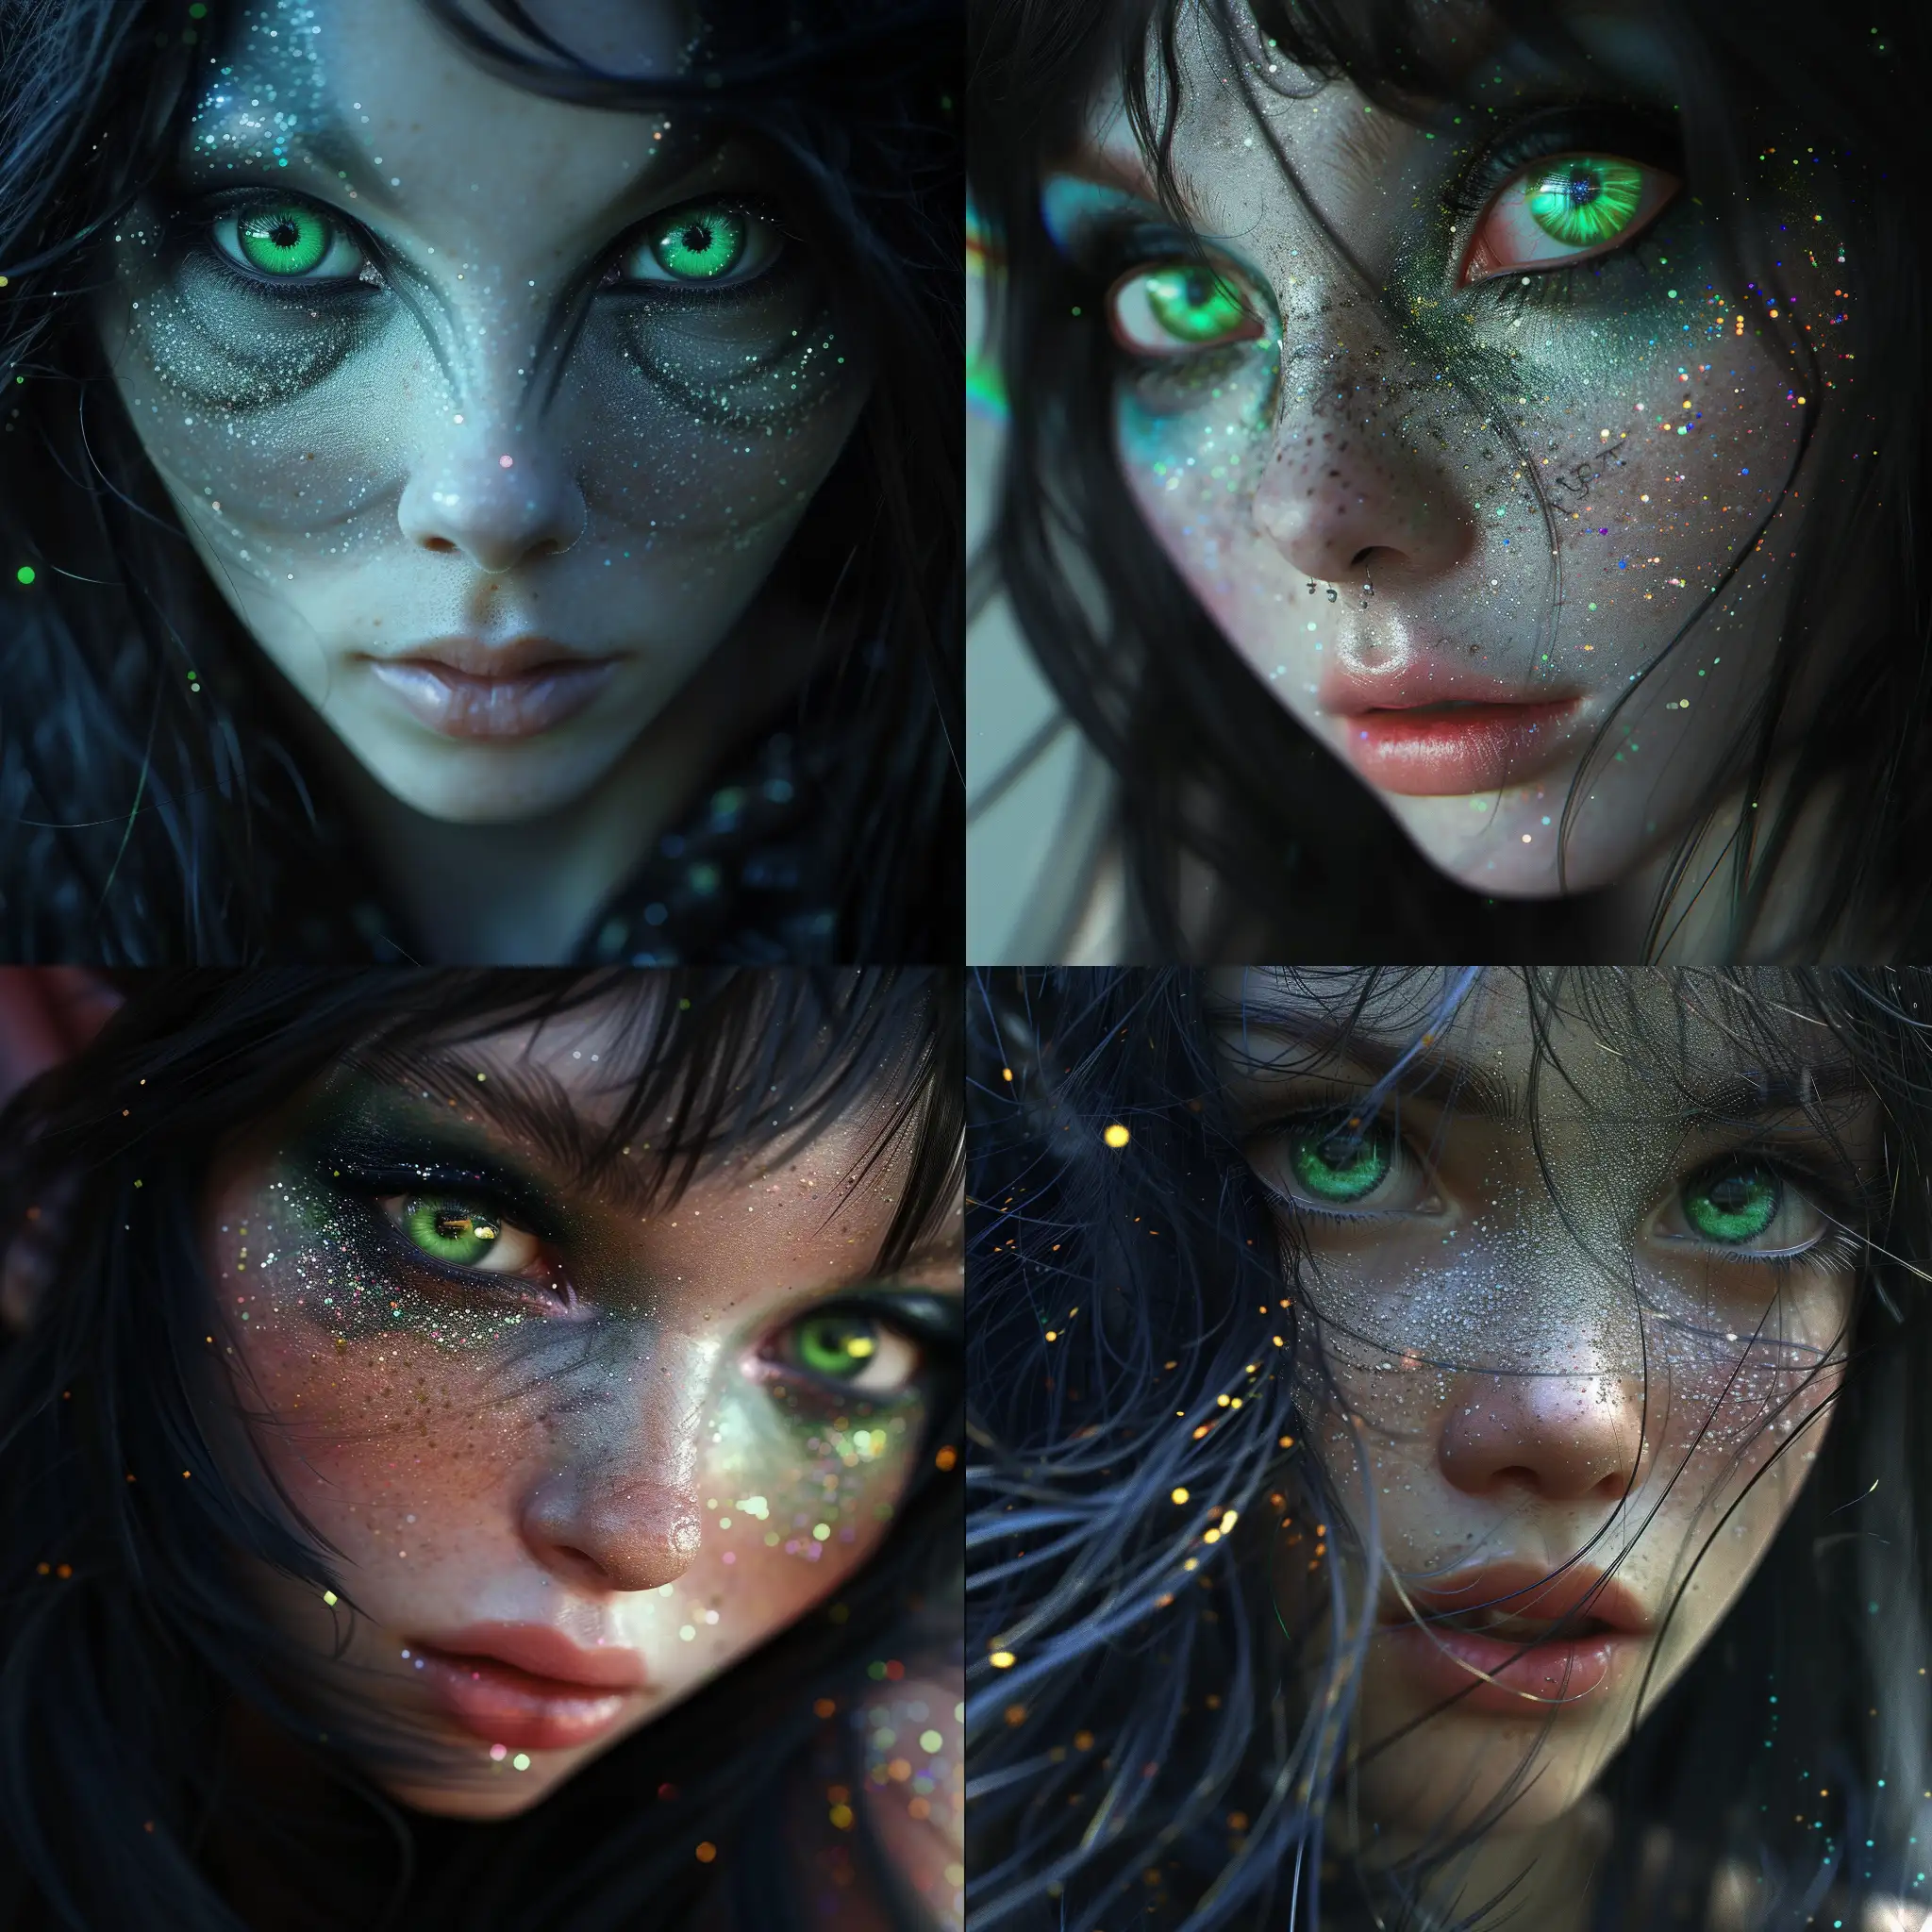 A close up image of an alien elven girl with black hair, bright green eyes and glitter on her face. Highly realistic, detailed, fantasy, sci fi